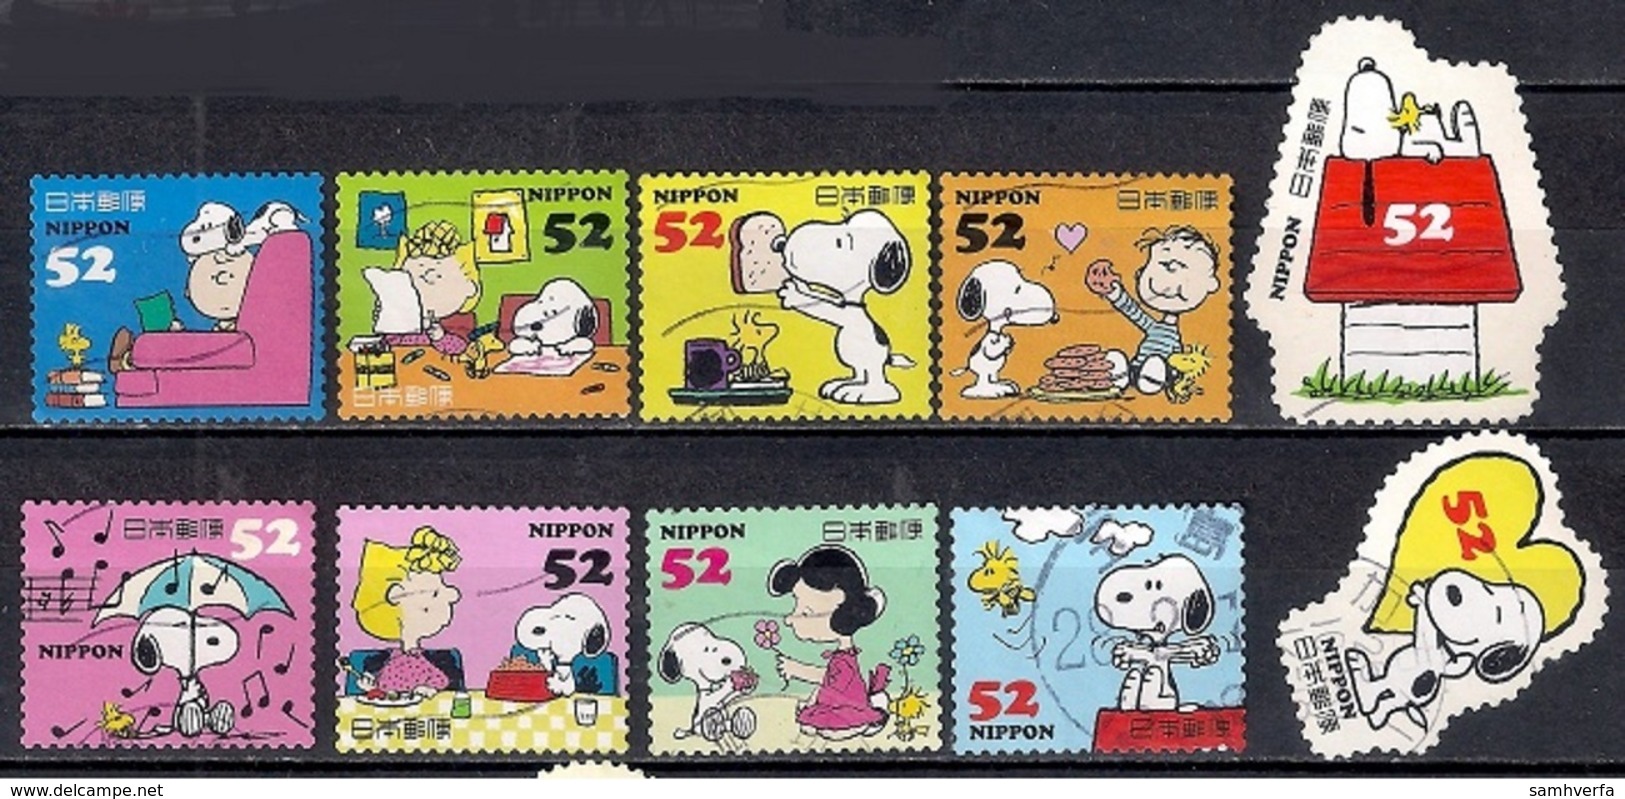 Japan 2014 - Snoopy And Friends (52 Yens) - Usados